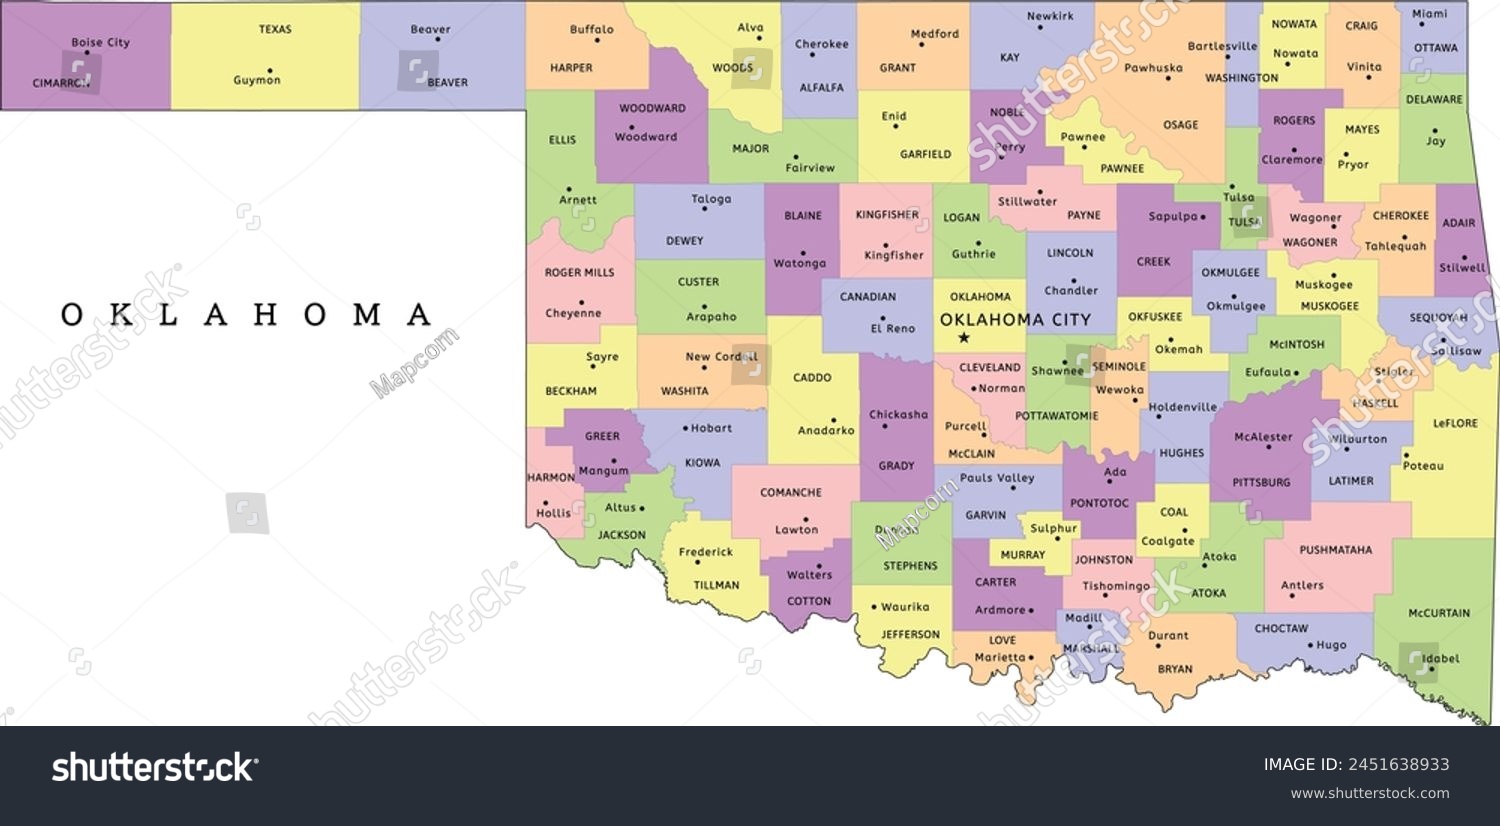 SVG of Oklahoma state administrative map with counties and seats. Clored. Vectored. Bright colors svg